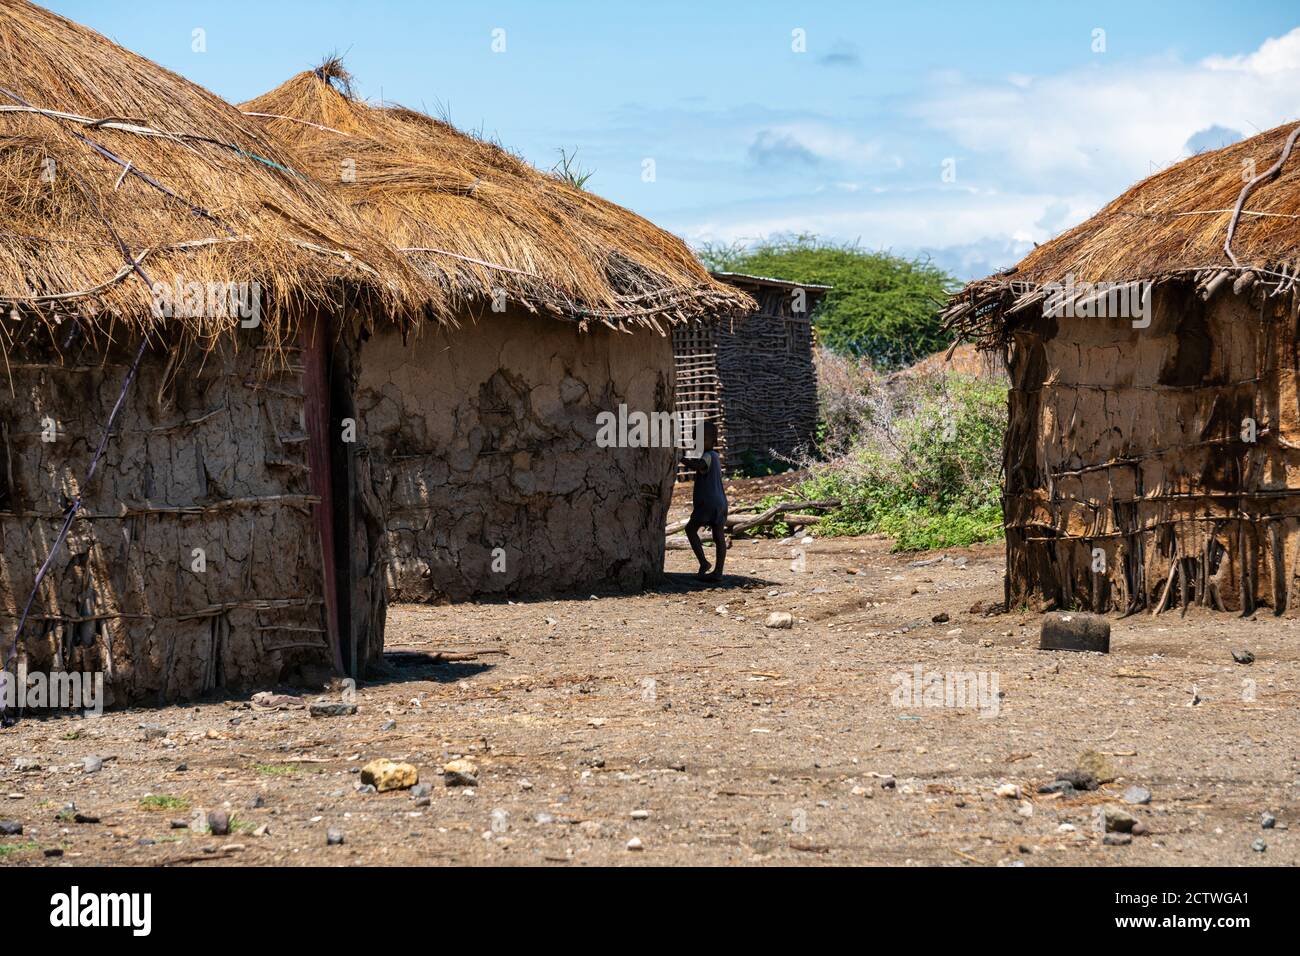 ENGARE SERO. TANZANIA - JANUARY 2020: Indigenous Maasai Boy near the Clay Hut in Traditional Village. Maasailand is the area in Rift Valley Between Stock Photo